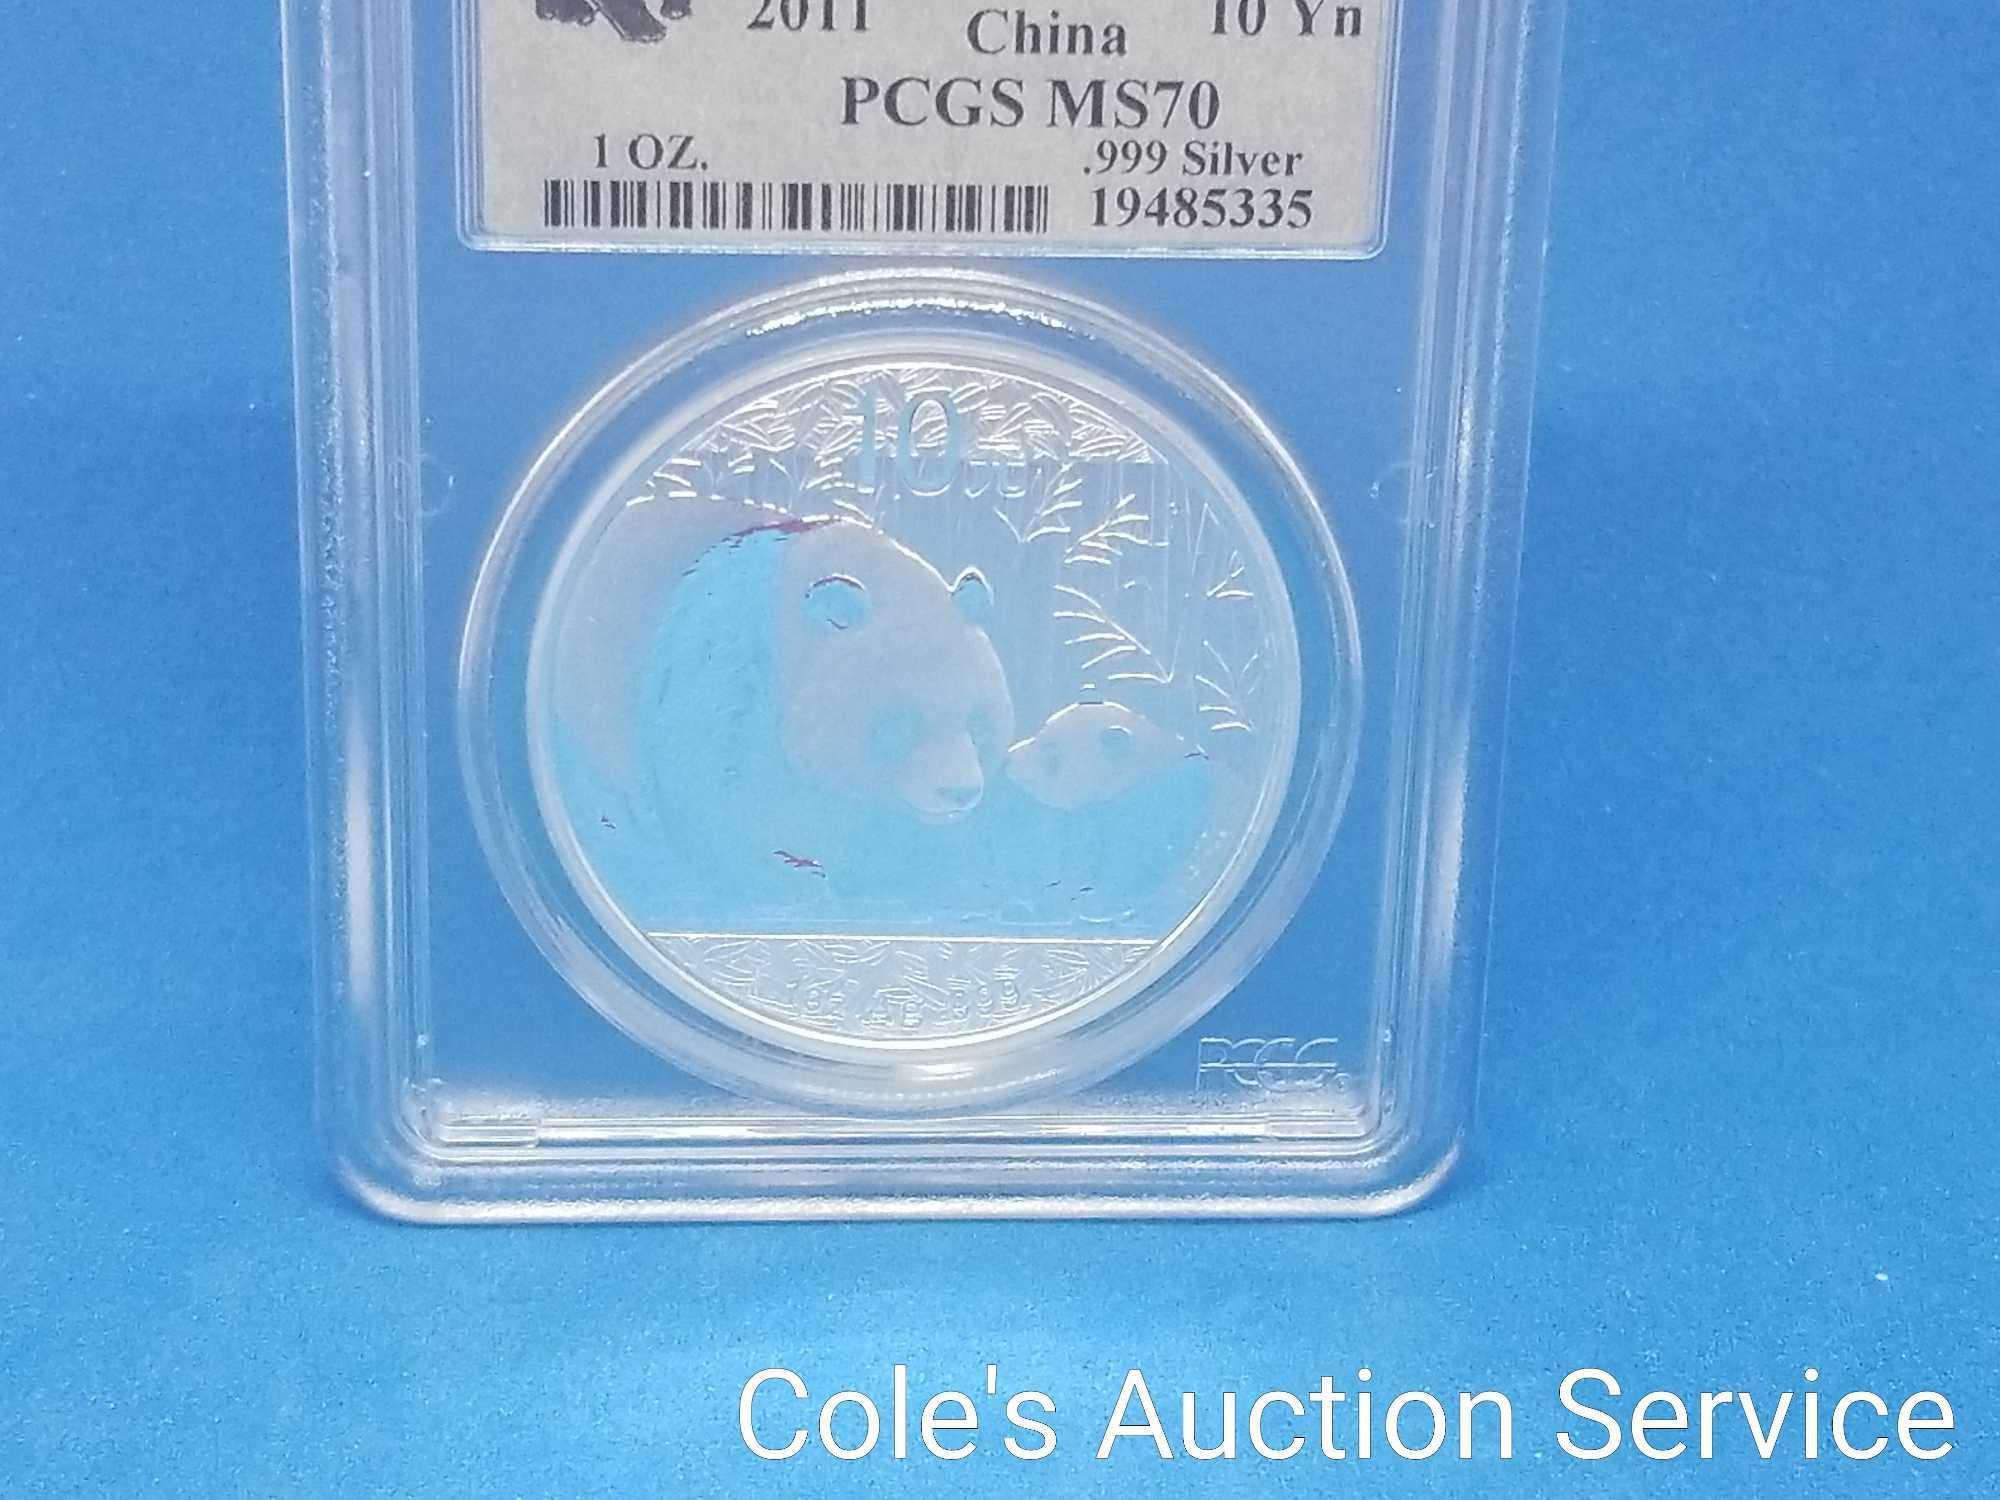 2011 Chinese first strike 1 oz silver coin. Beautiful coin graded MS70 by PCGS.